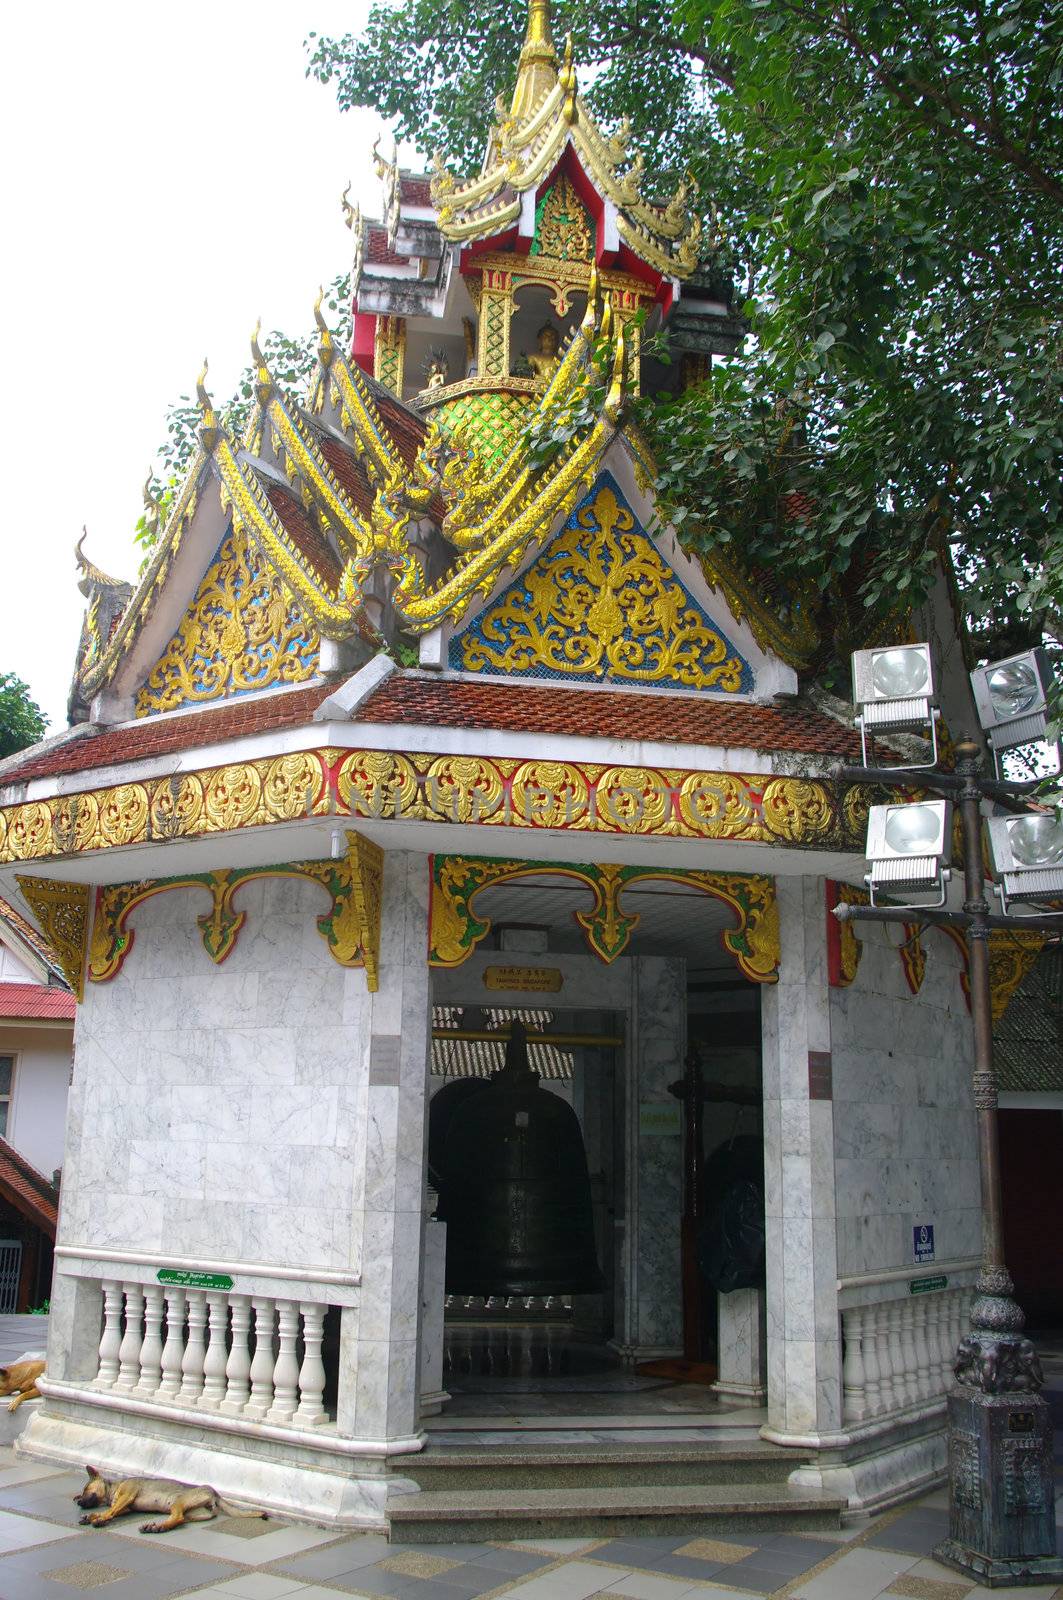 Belfry of the gong and the bell of Wat Doi Suthep Phrathat by Duroc